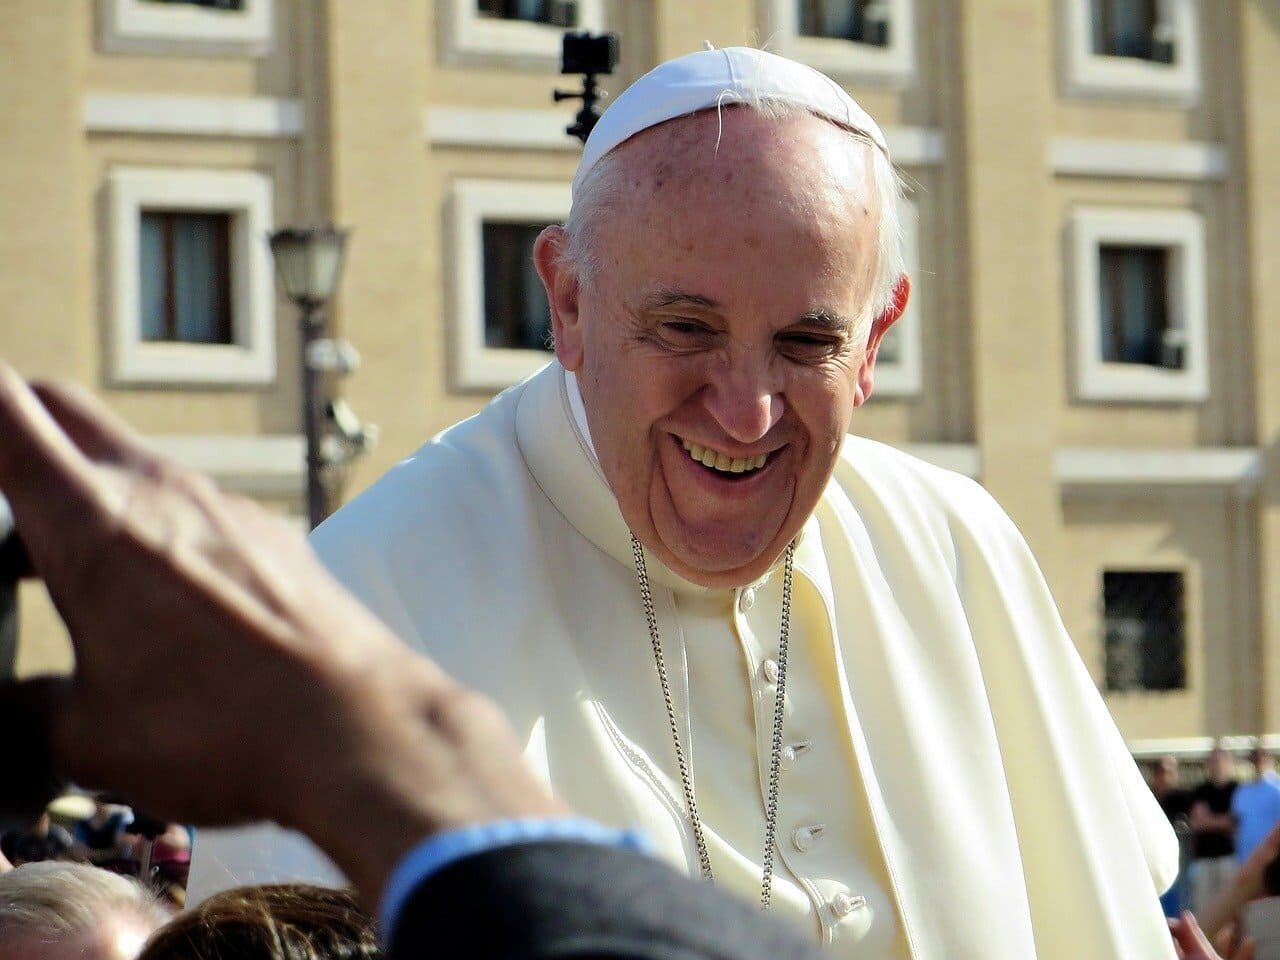 Is the Pope the Antichrist?